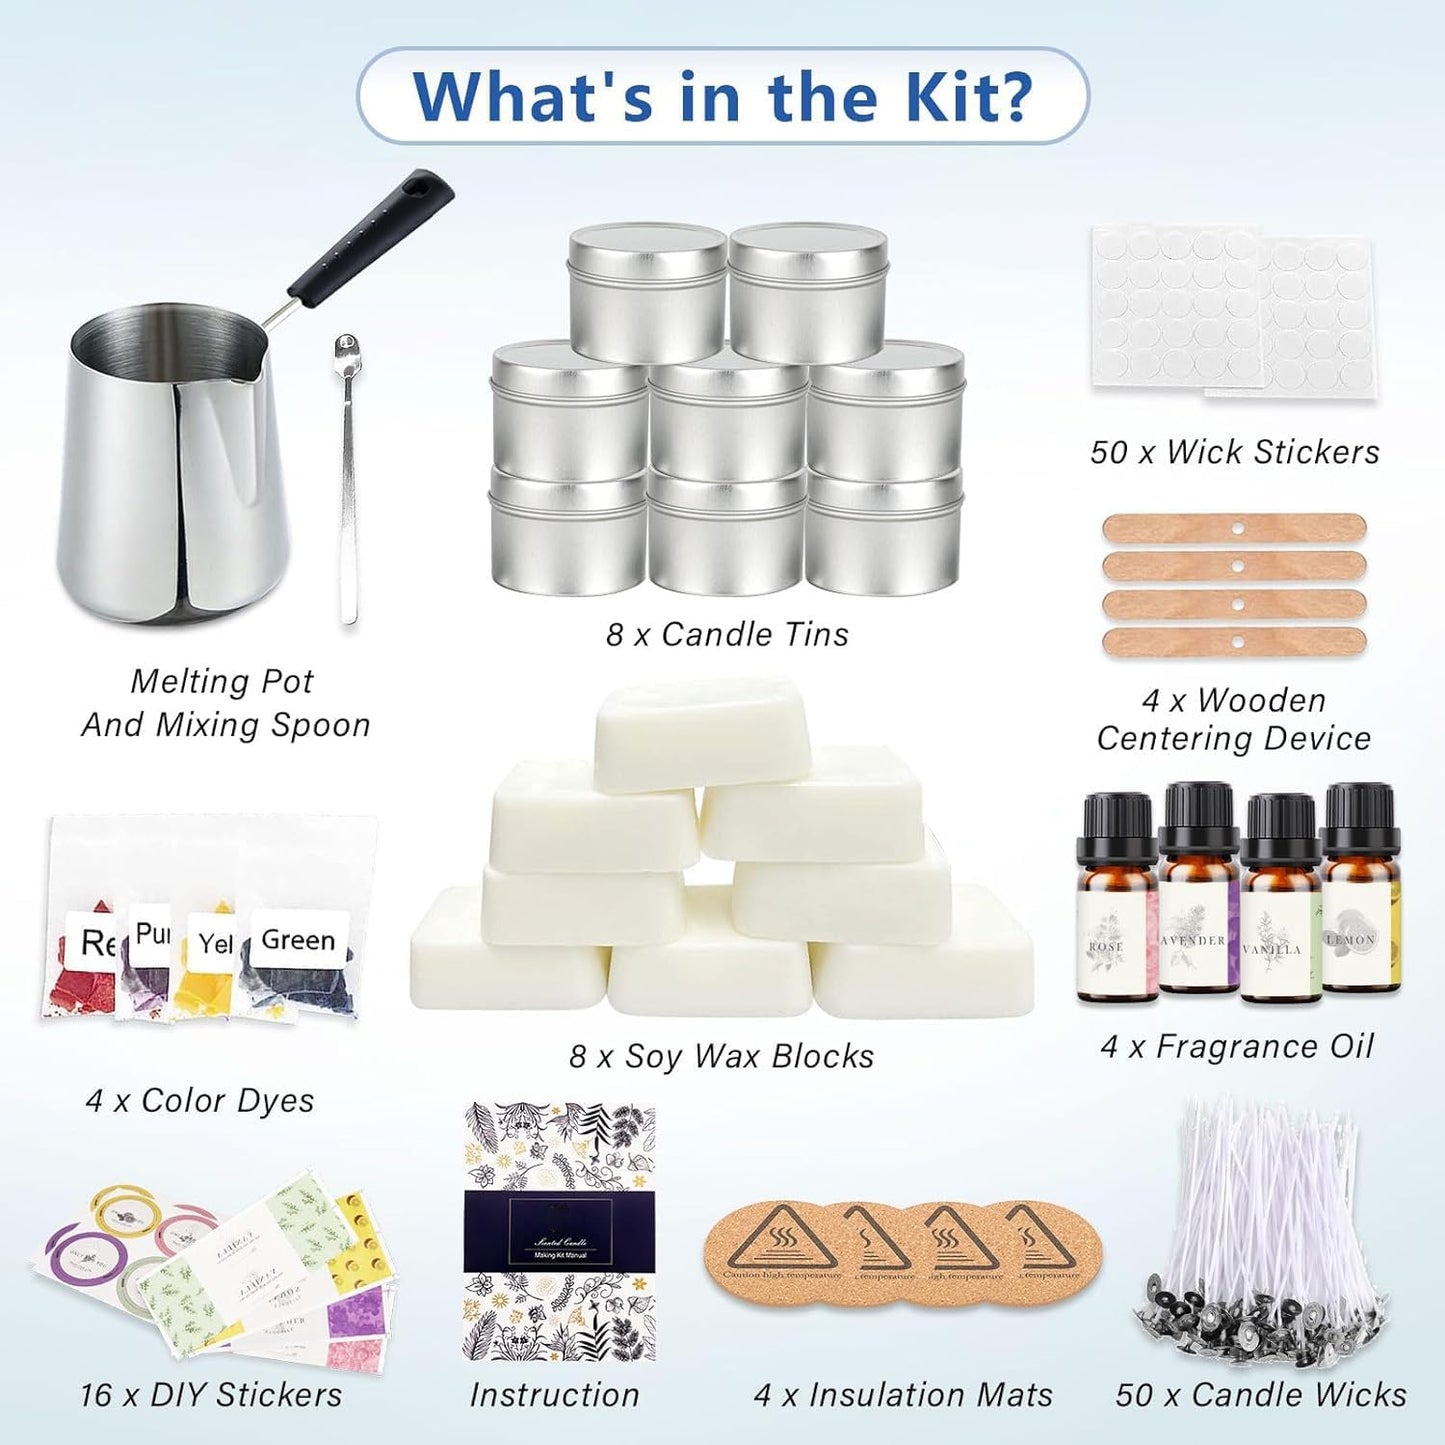 Complete Candle Making Kits for Adults Beginners,Diy Candle Making Supplies Include Soy Wax,Wax Melter,Scents,Dyes,Wicks,Wicks Sticker,Candle Tins & More-Full Candle Making Set - Arts & Crafts Kits